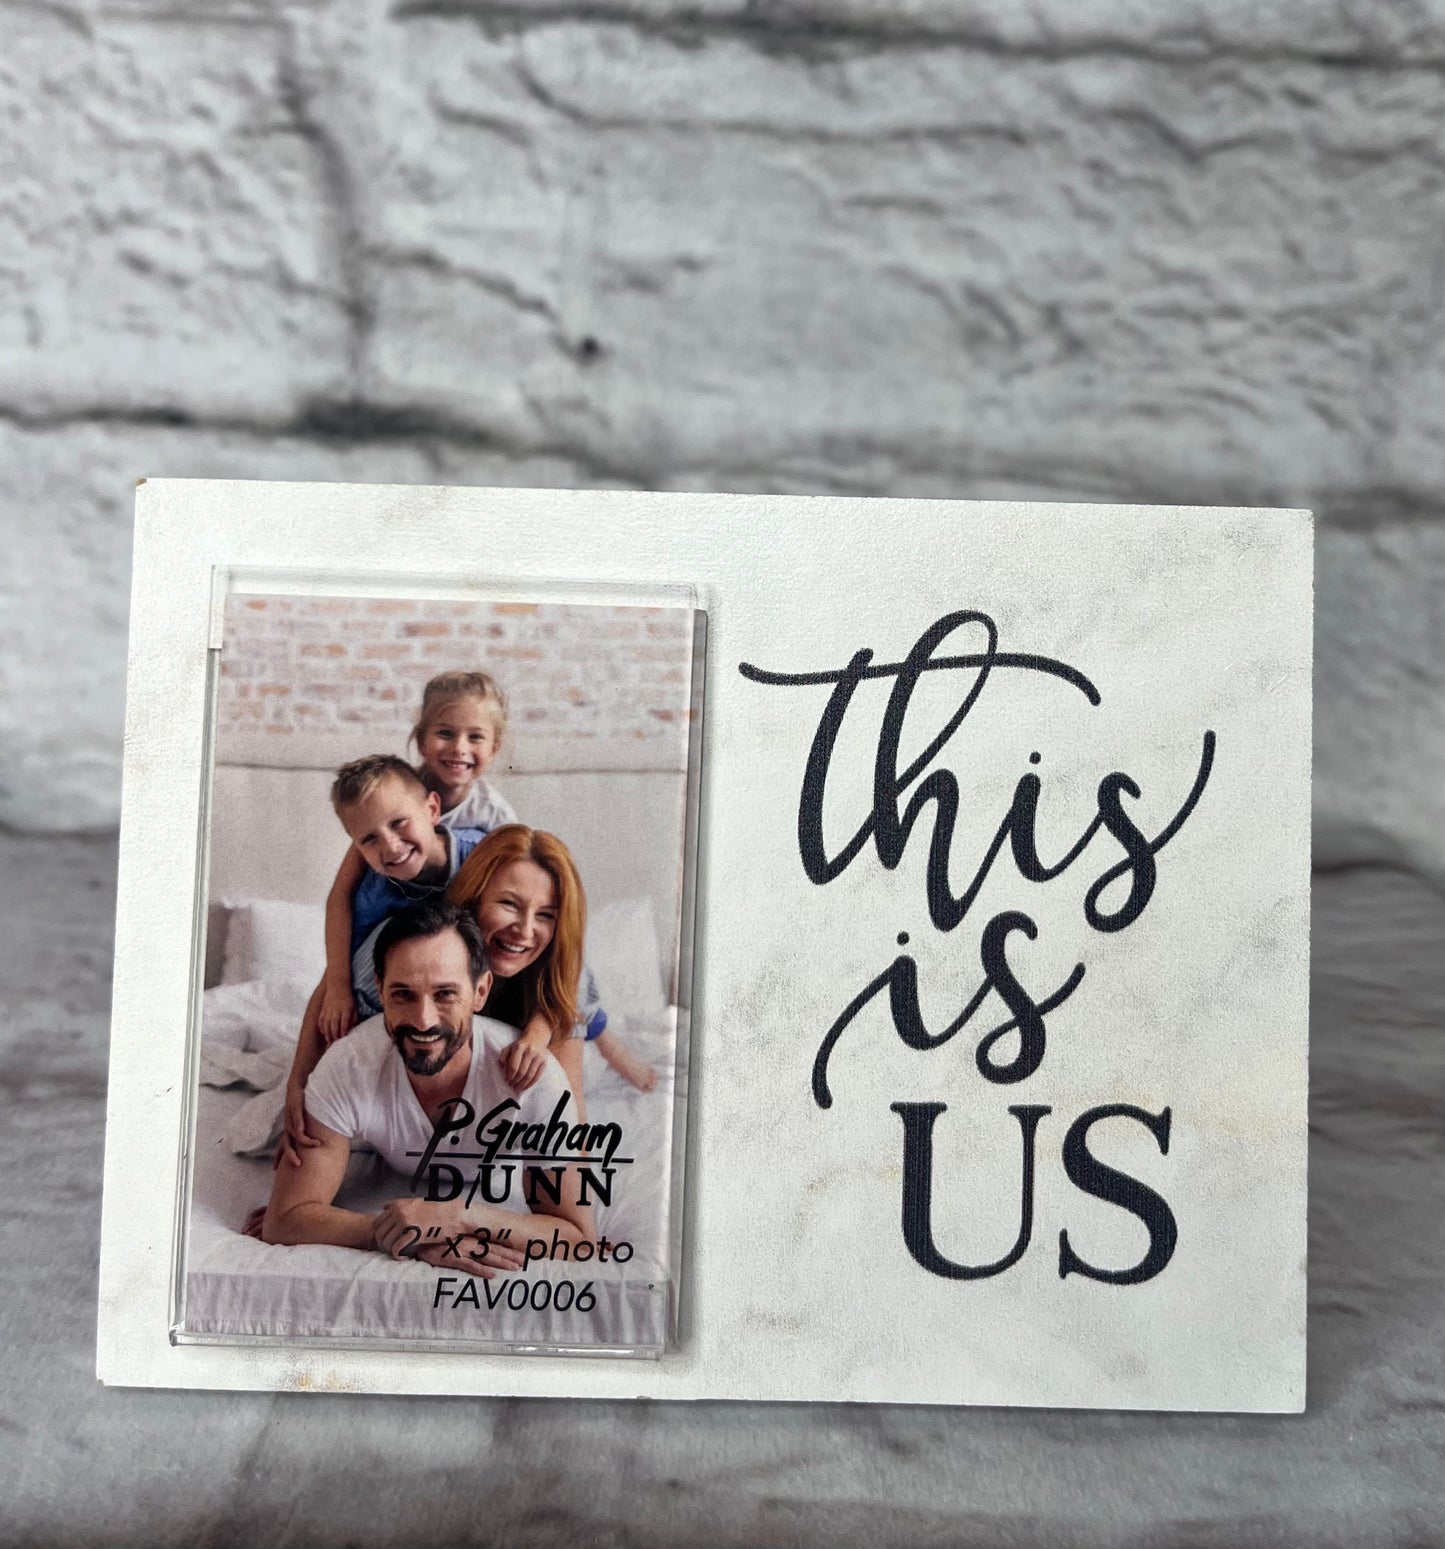 This Is Us Frame